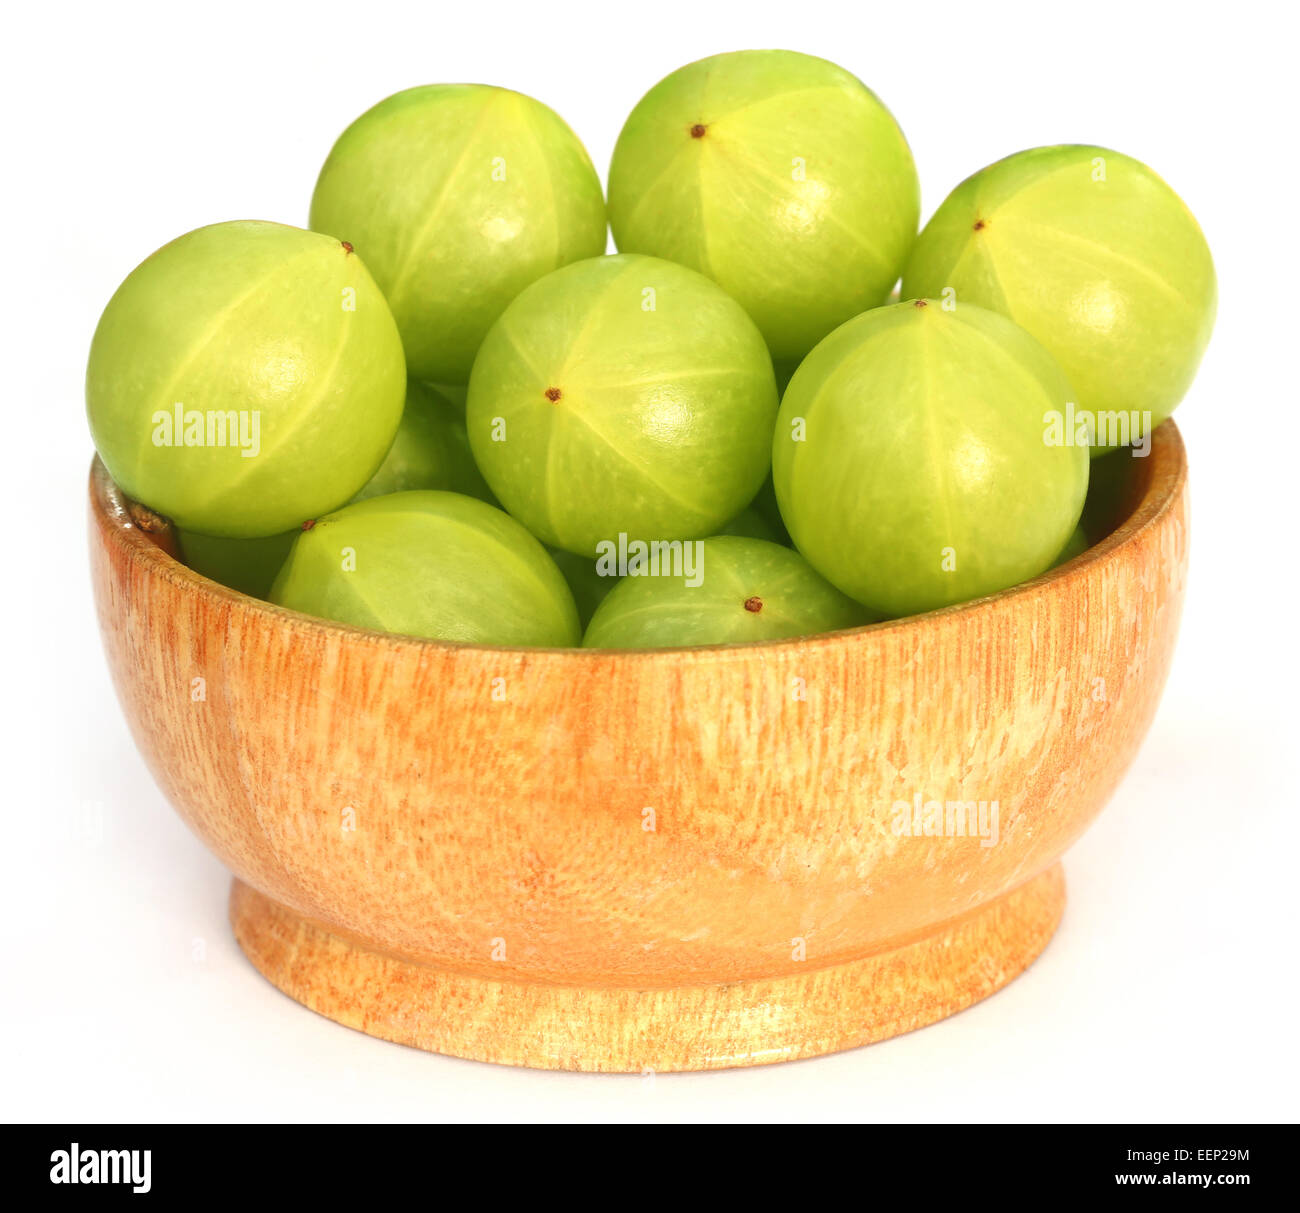 Amla fruits in a bowl over white background Stock Photo